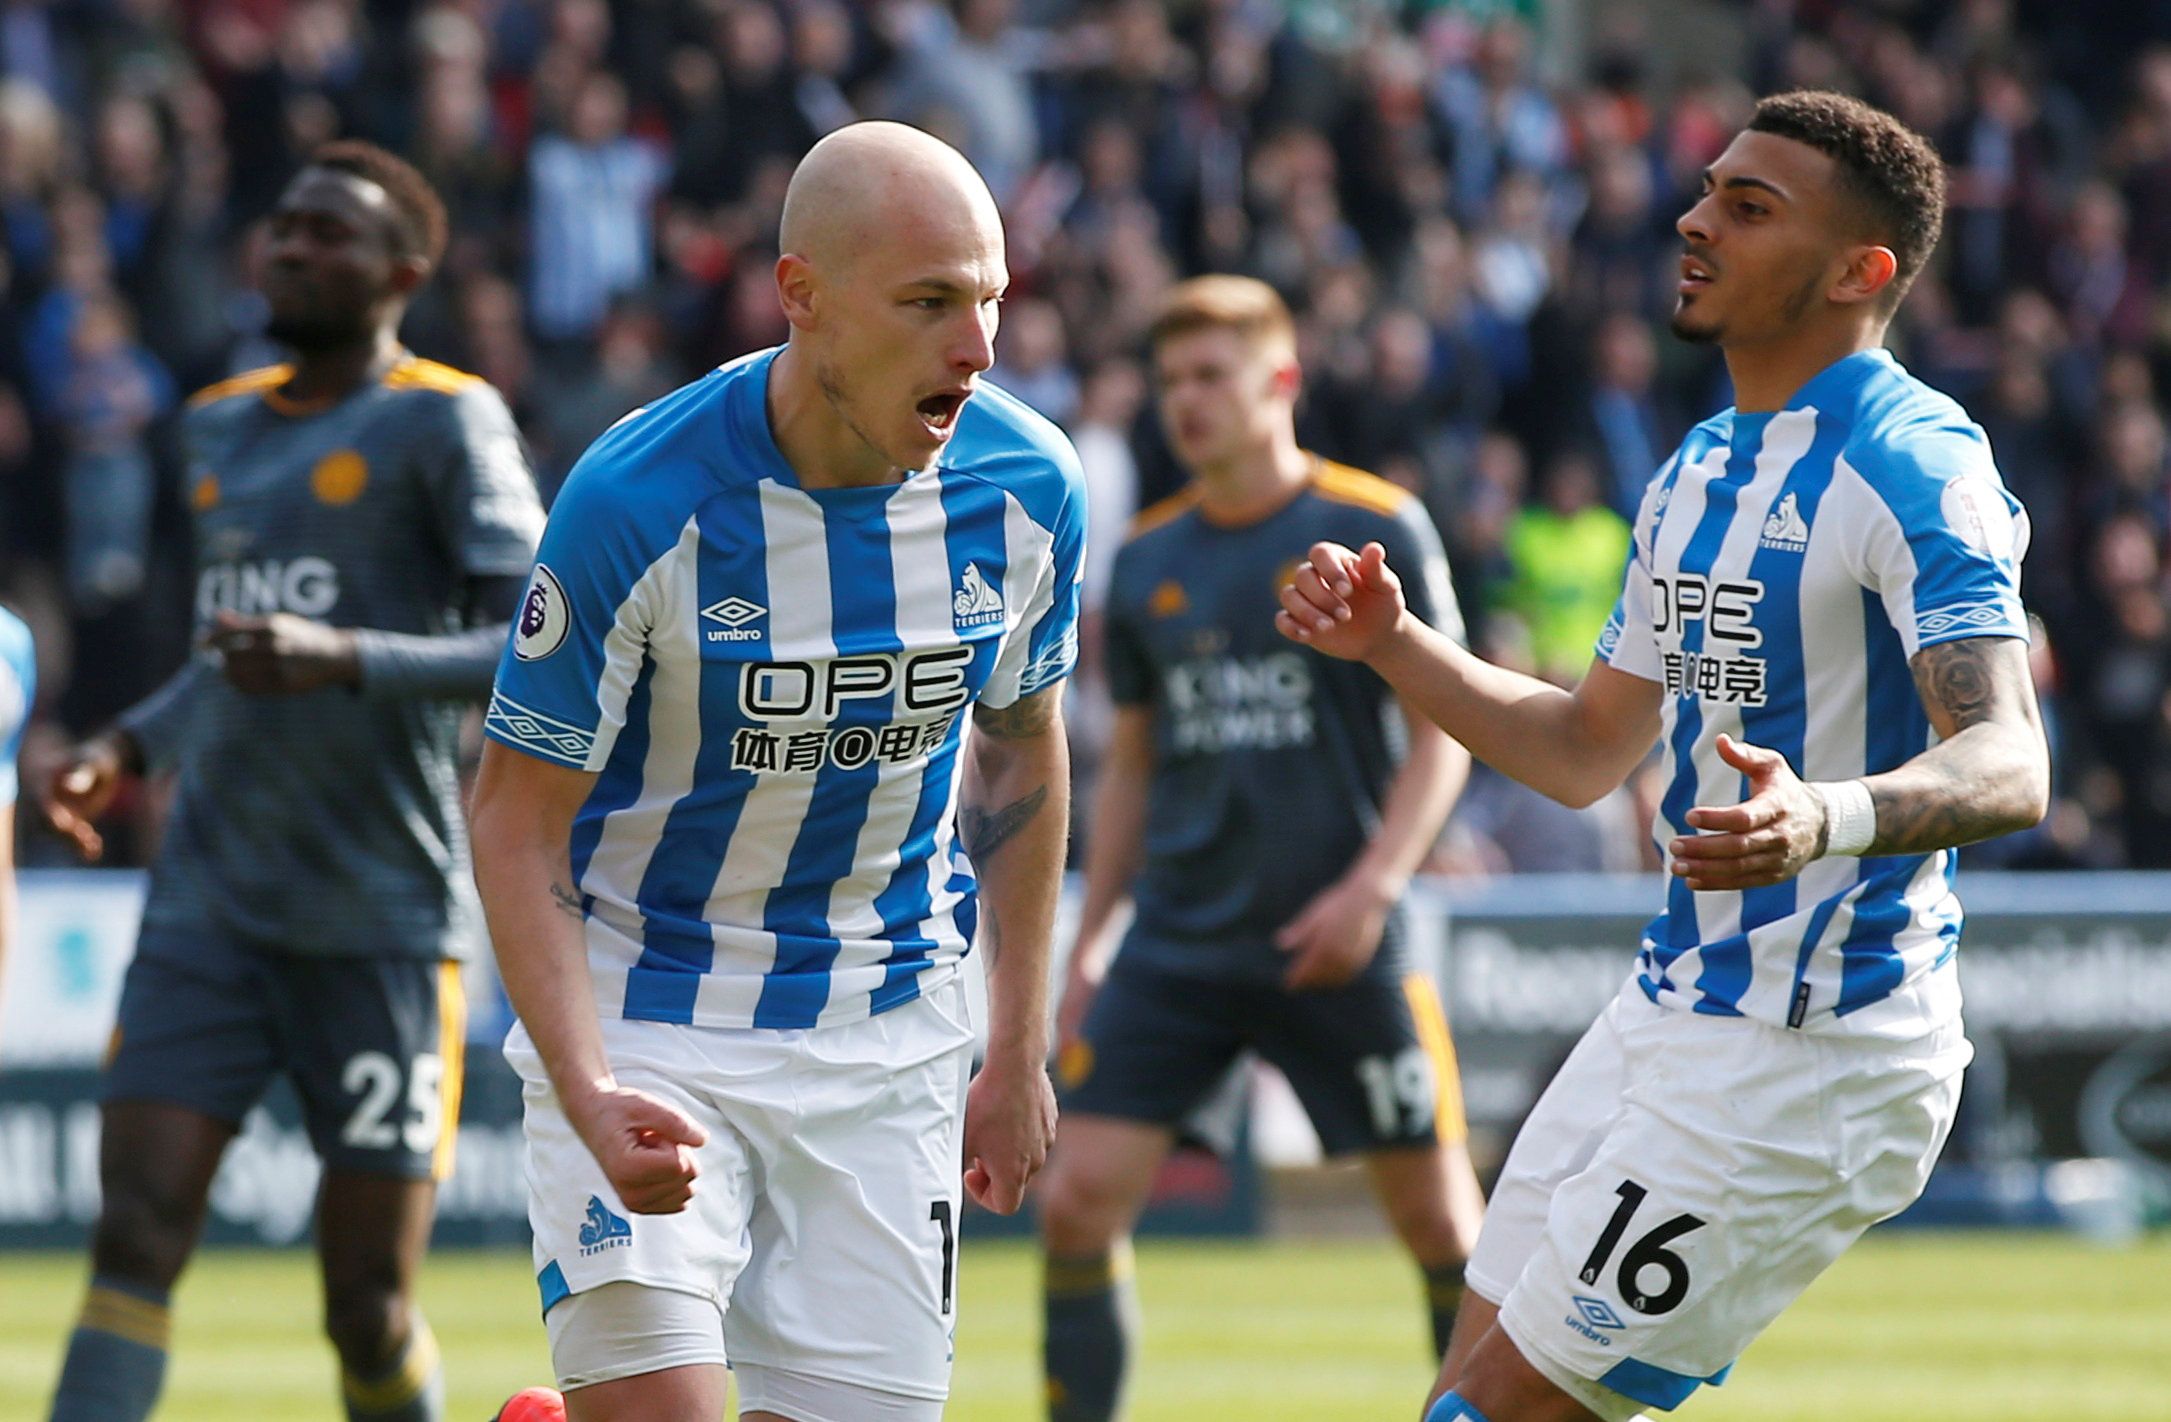 Soccer Football - Premier League - Huddersfield Town v Leicester City - John Smith's Stadium, Huddersfield, Britain - April 6, 2019  Huddersfield Town's Aaron Mooy celebrates scoring their first goal    REUTERS/Andrew Yates  EDITORIAL USE ONLY. No use with unauthorized audio, video, data, fixture lists, club/league logos or 